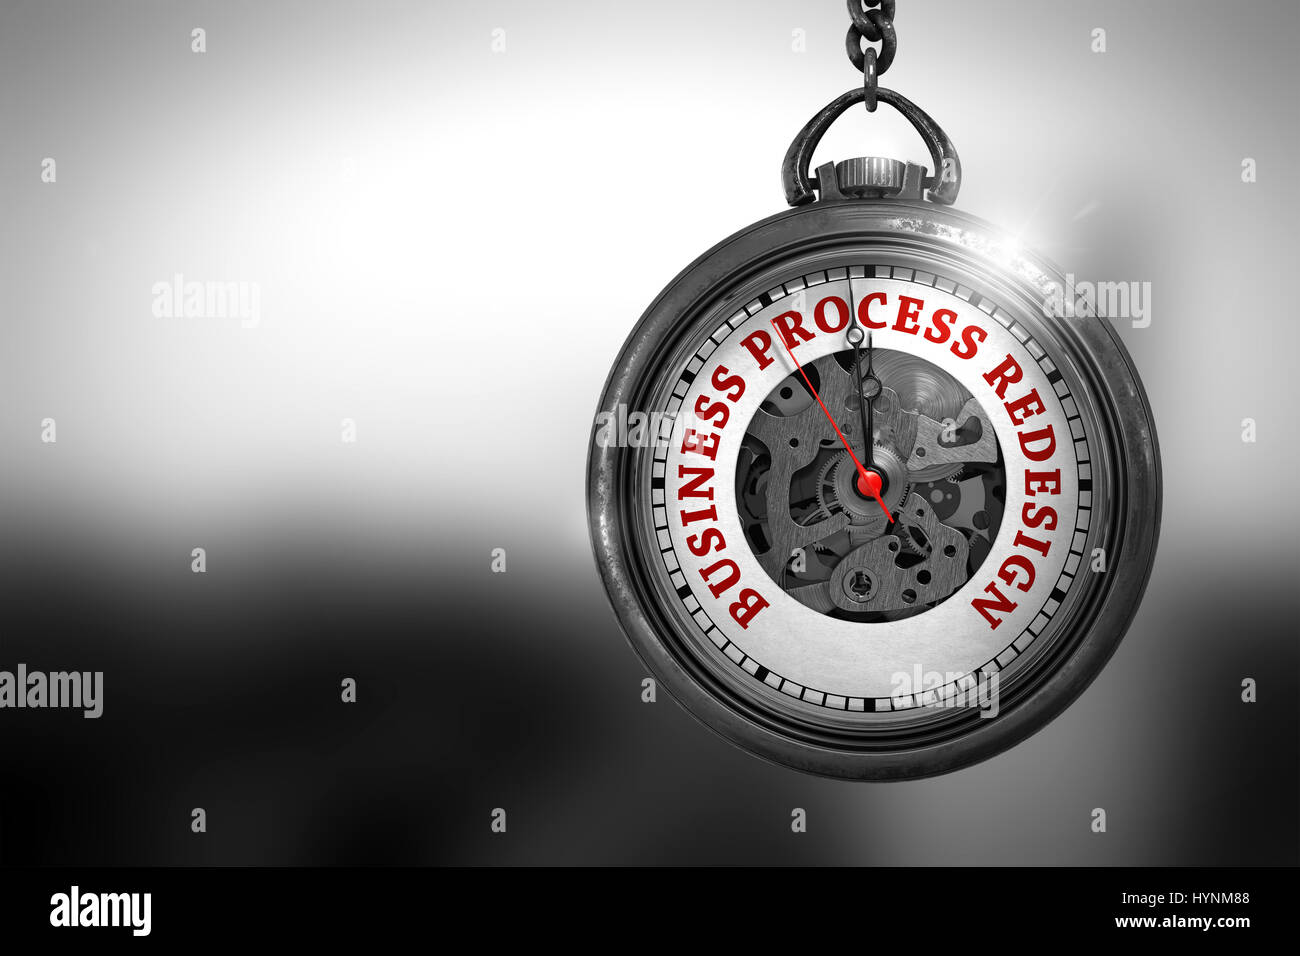 Business Process Redesign on Pocket Watch. 3D Illustration. Stock Photo